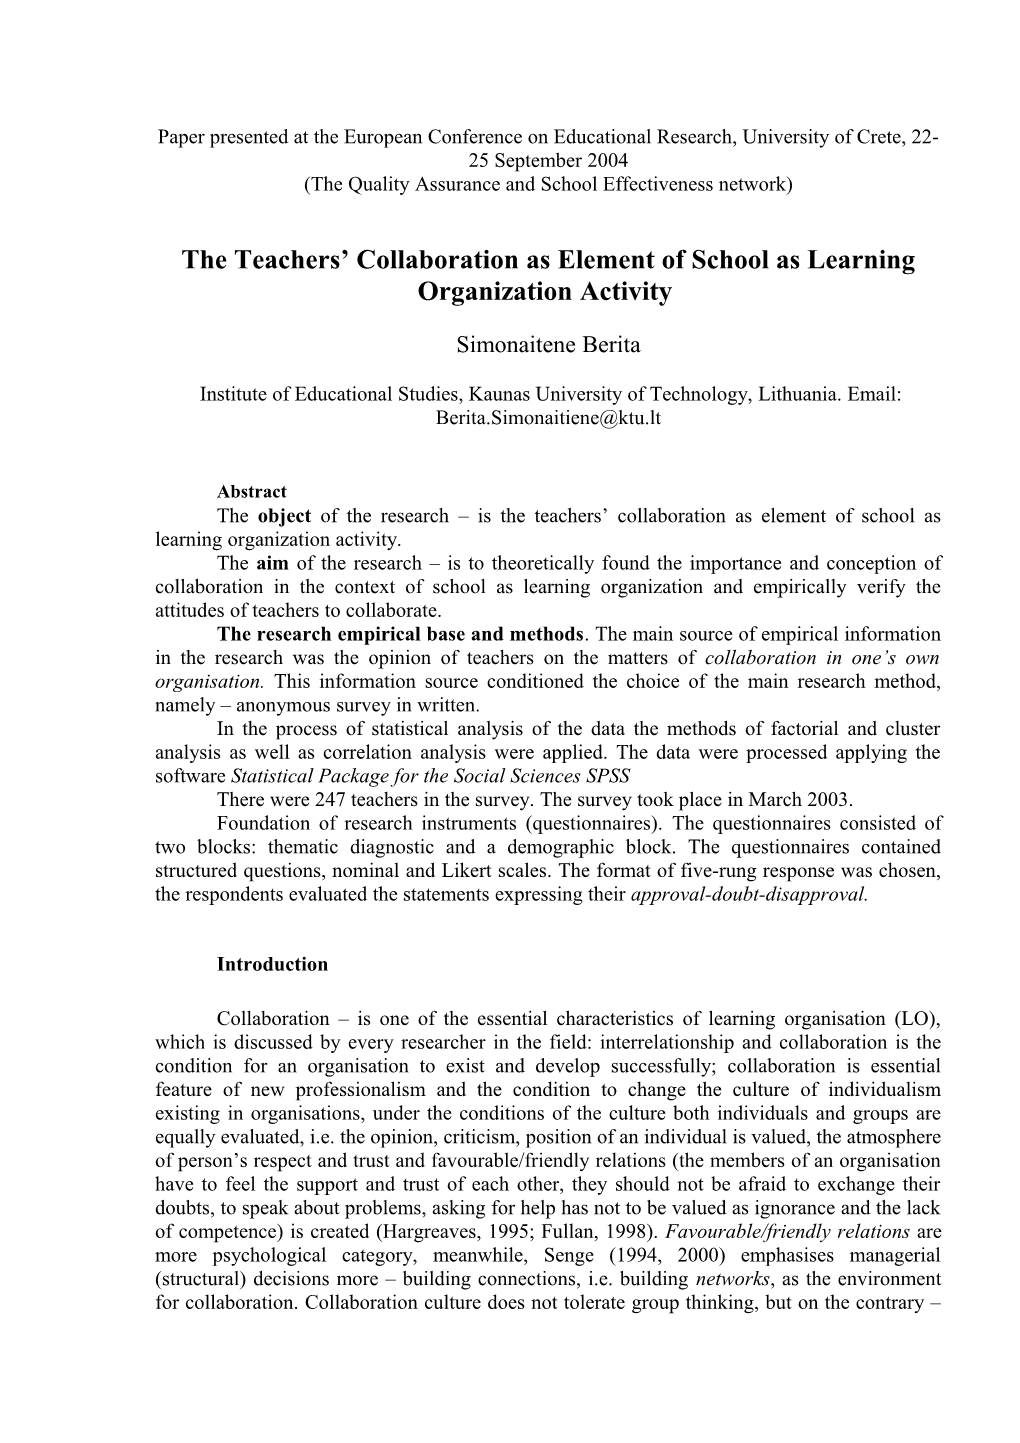 The Teachers Collaboration As Element of School As Learning Organization Activity